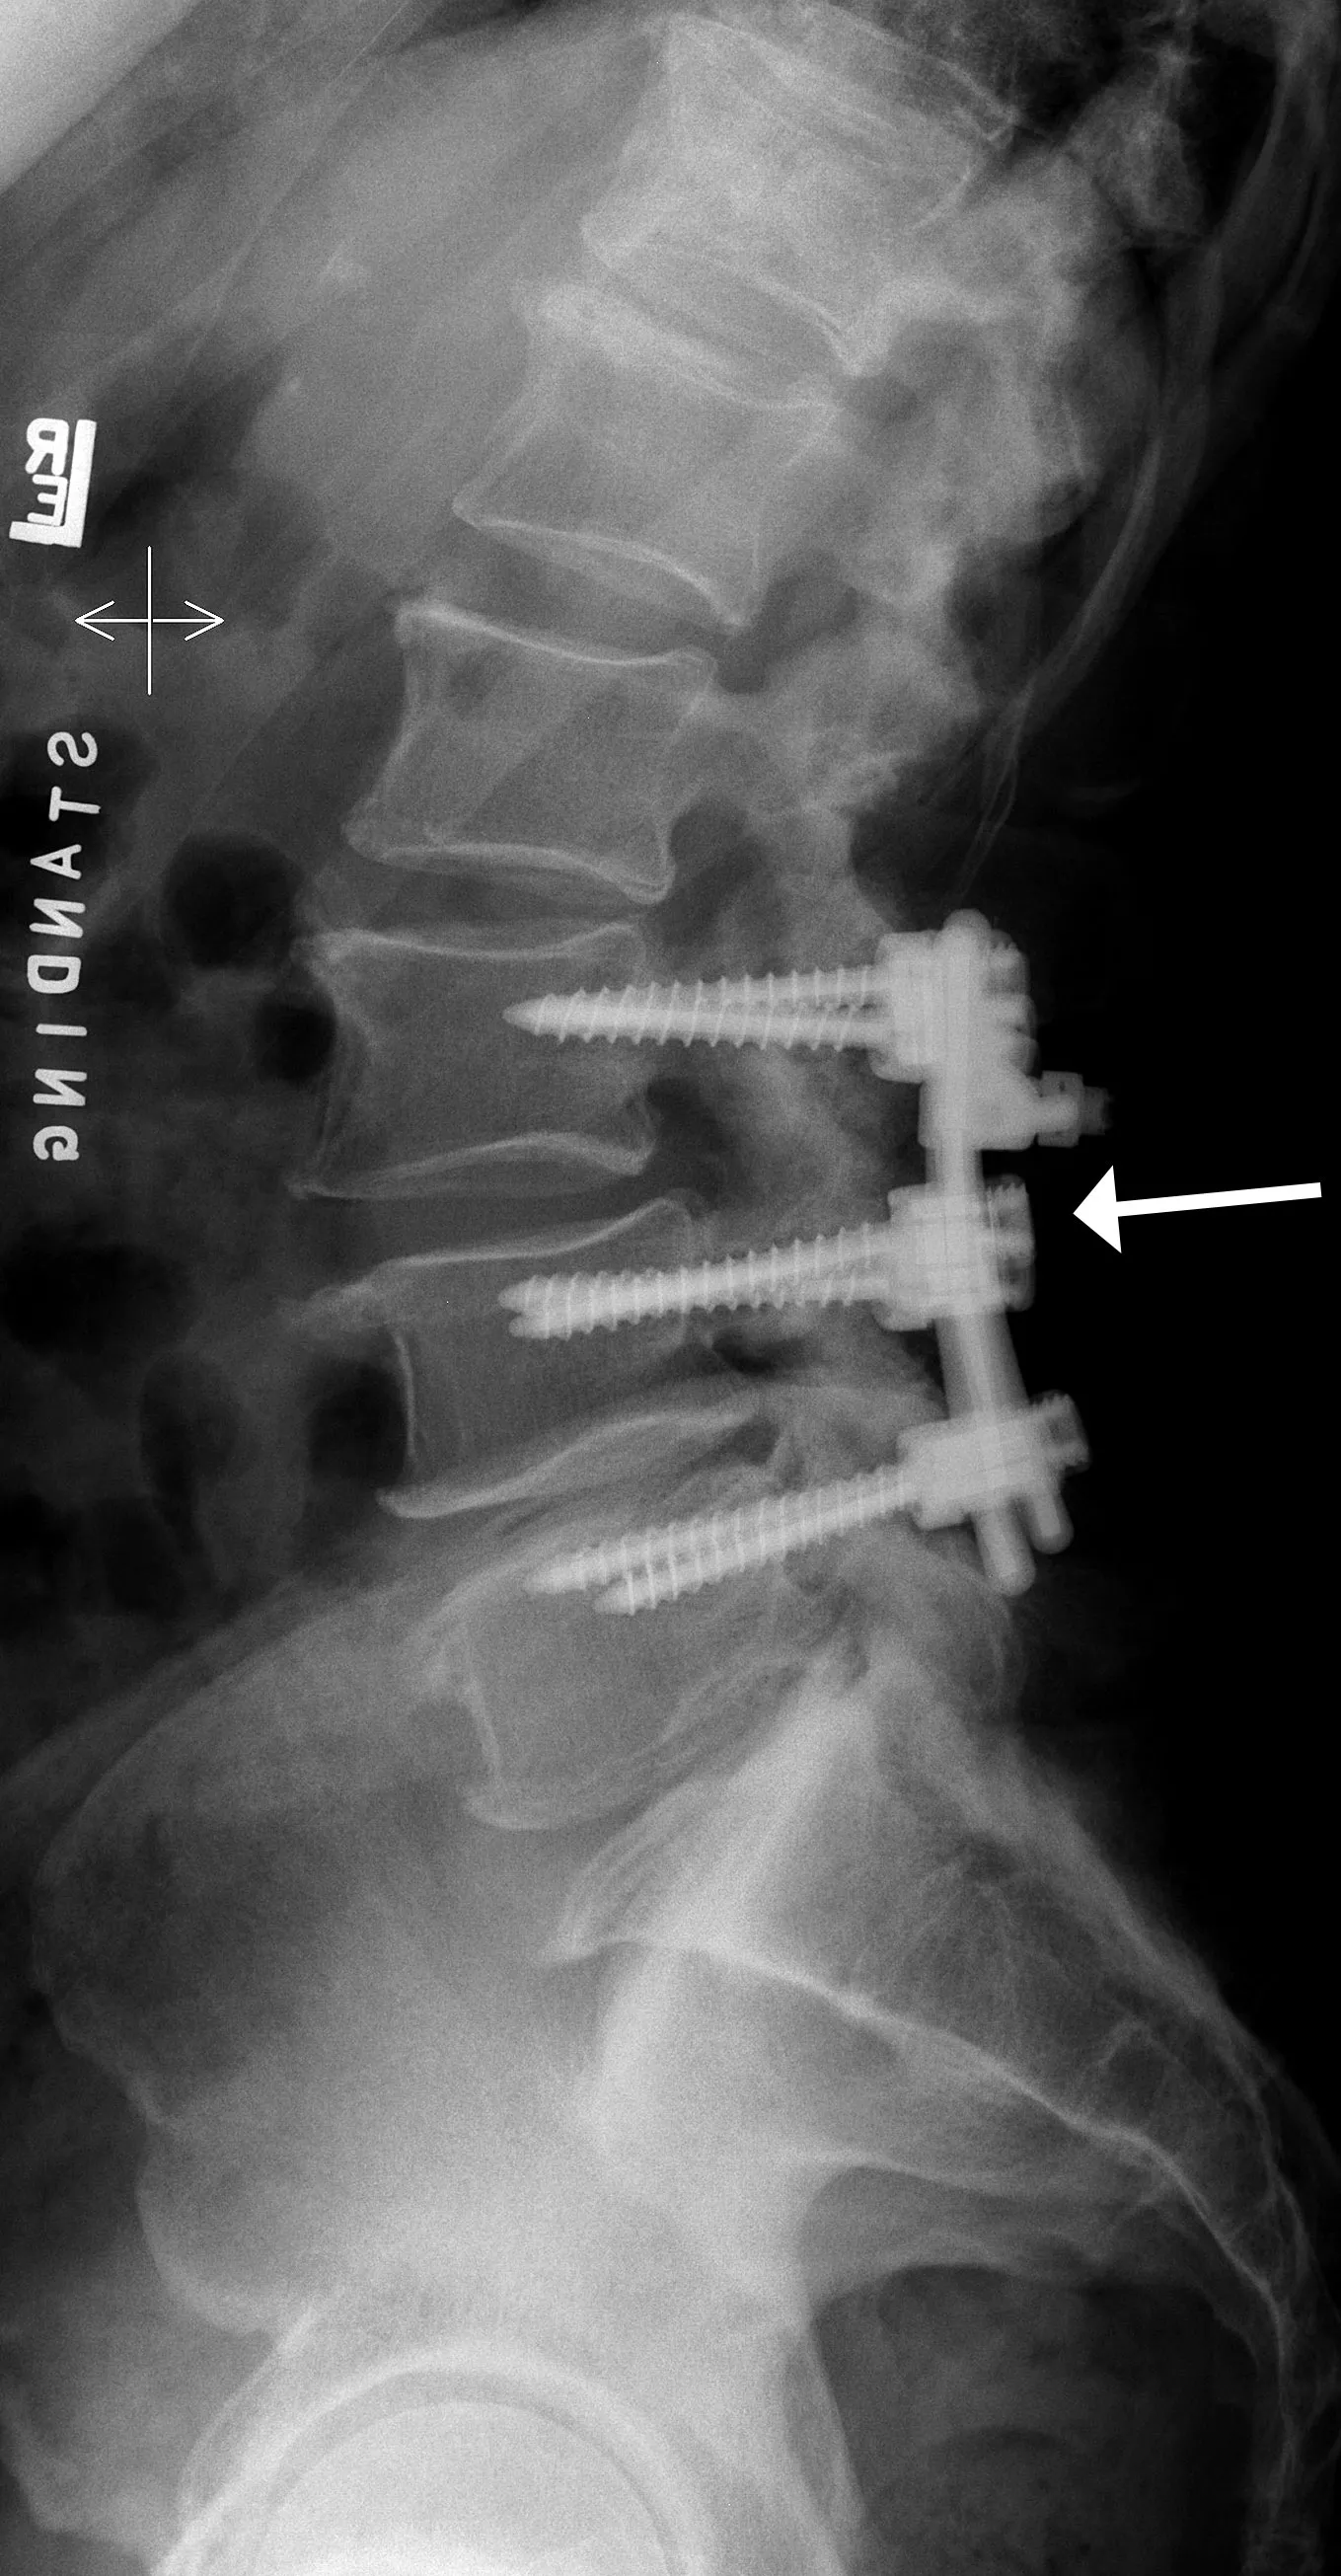 X-ray side view of low back with rods and screws (lumbar spine)